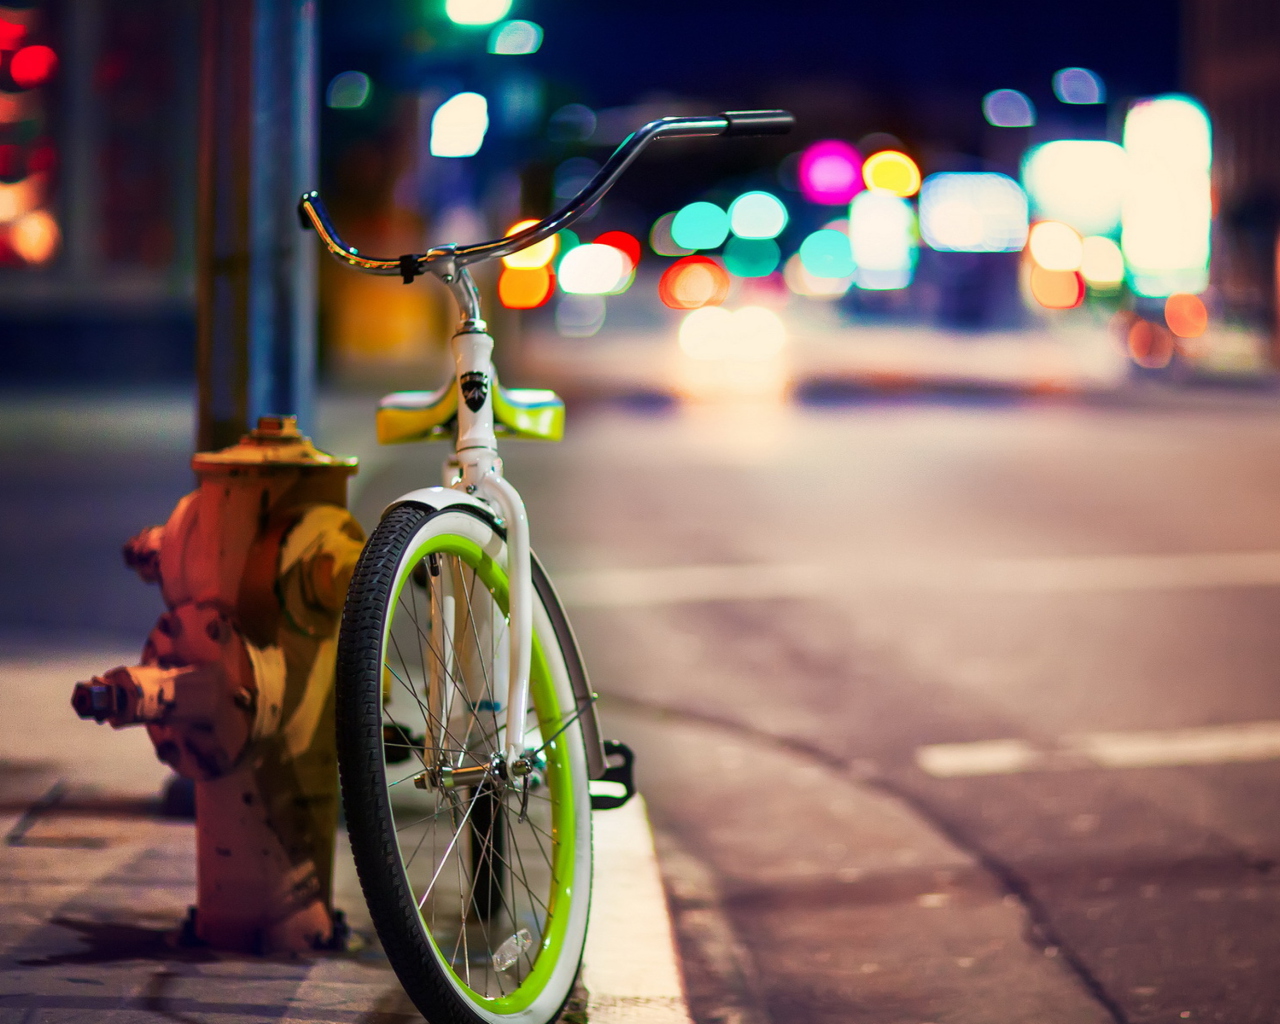 Das Green Bicycle In City Lights Wallpaper 1280x1024